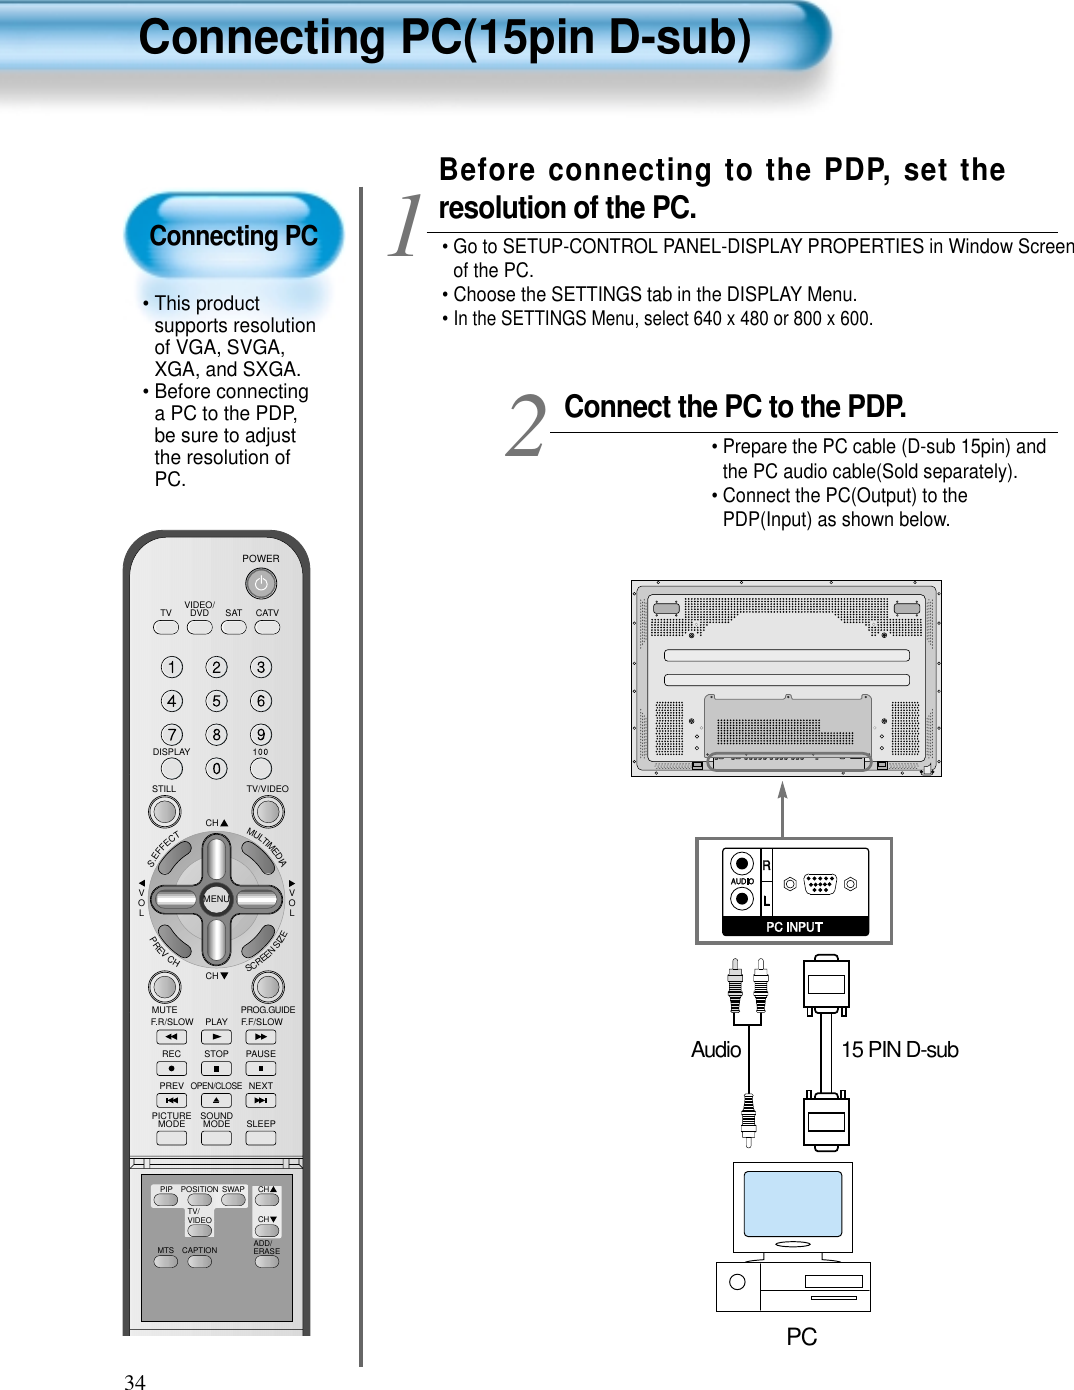 Connecting PC• This productsupports resolutionof VGA, SVGA,XGA, and SXGA.• Before connectinga PC to the PDP,be sure to adjustthe resolution ofPC.Connecting PC(15pin D-sub)34VIDEO/DVD SATTV CATVDISPLAYTV/VIDEOSTILLCHCHVOLVOLMULTIMEDIAS.EFFECTMENUPREVCHSCREENSIZEMUTE PROG.GUIDEF.F/SLOWPLAYF.R/SLOWREC STOP PAUSEPREVOPEN/CLOSENEXTPICTUREMODE SOUNDMODE SLEEPPOWERMTS CAPTIONPIP POSITION SWAPTV/VIDEOADD/ERASECHCHConnect the PC to the PDP.• Prepare the PC cable (D-sub 15pin) andthe PC audio cable(Sold separately).• Connect the PC(Output) to thePDP(Input) as shown below. 2Before connecting to the PDP, set theresolution of the PC.• Go to SETUP-CONTROL PANEL-DISPLAY PROPERTIES in Window Screenof the PC.• Choose the SETTINGS tab in the DISPLAY Menu.• In the SETTINGS Menu, select 640 x 480 or 800 x 600.115 PIN D-subAudioPC